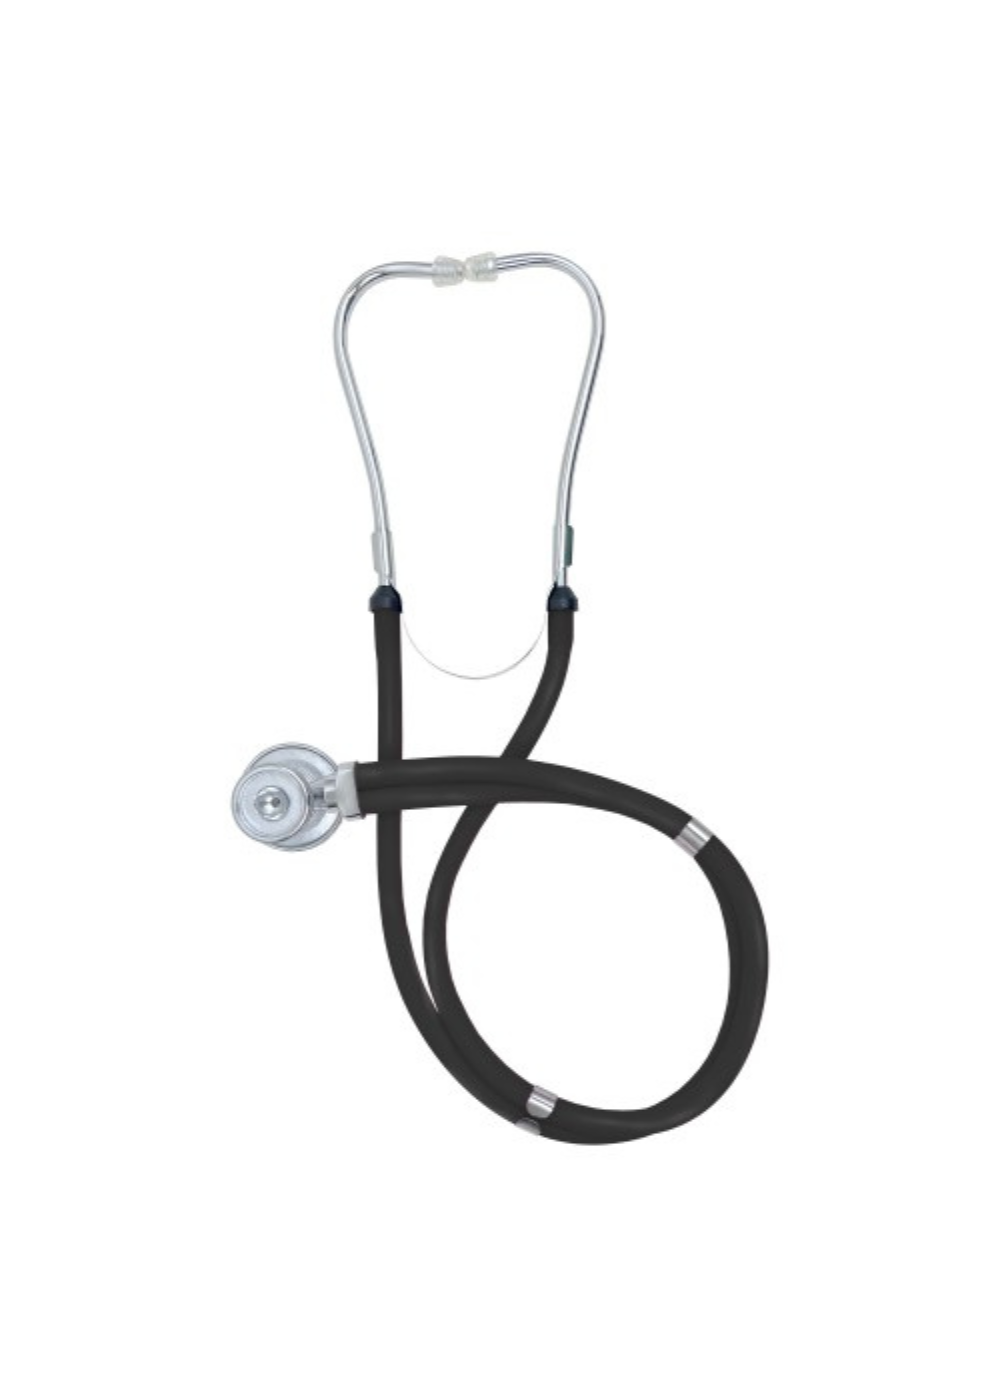 Think Medical Sprague Rappaport-Type Stethoscope - 92059